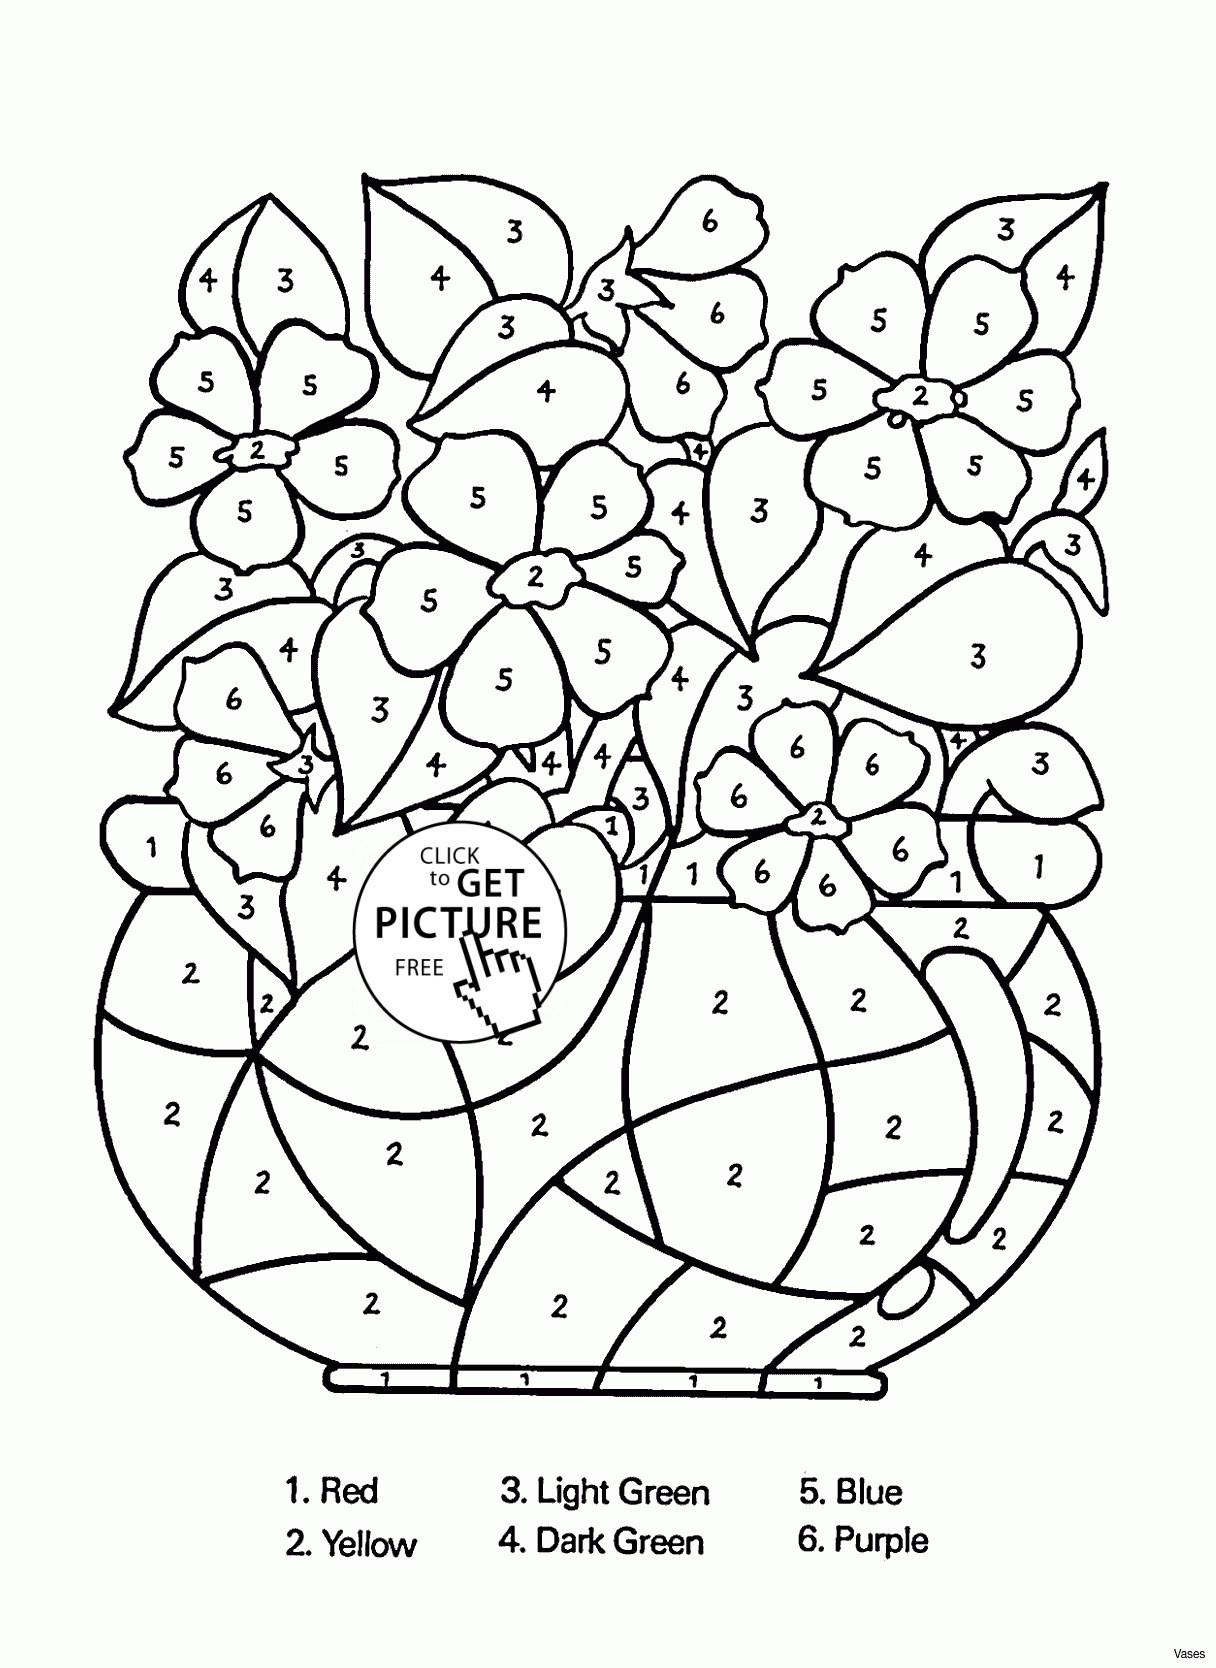 picture frame flower vase of awesome 43 unique color a picture coloring sheets for kids intended for awesome 43 unique color a picture